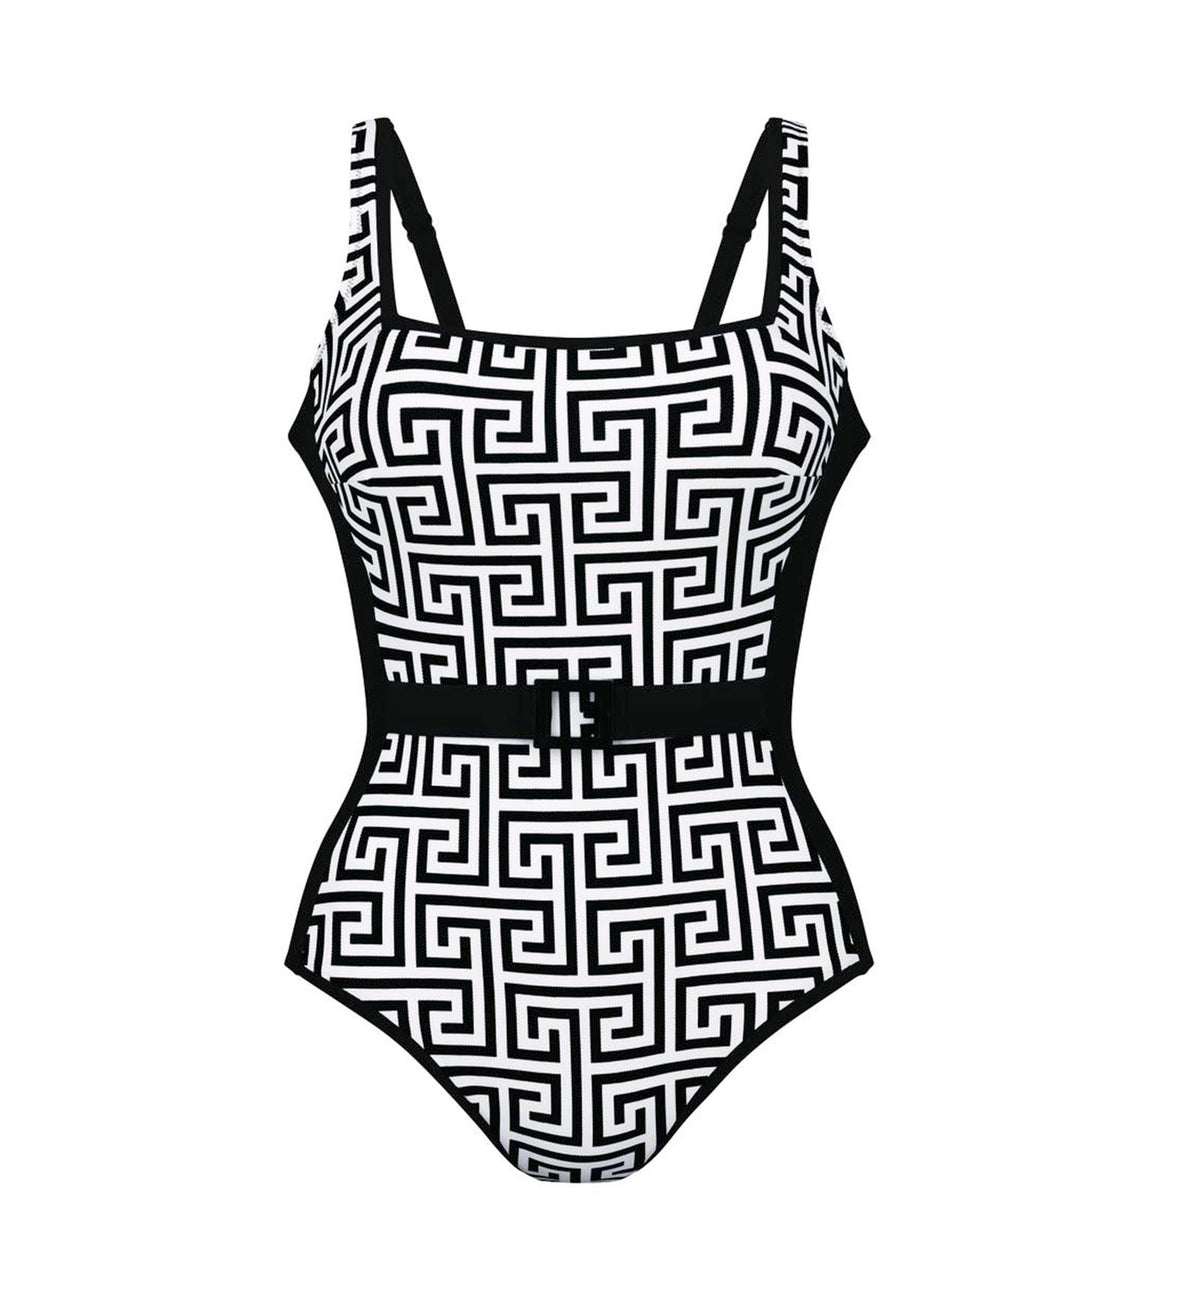 Anita Pure Graphics Dalida Slimming Lined One Piece Swimsuit (7225),32D,Black/White - Black/White,32D